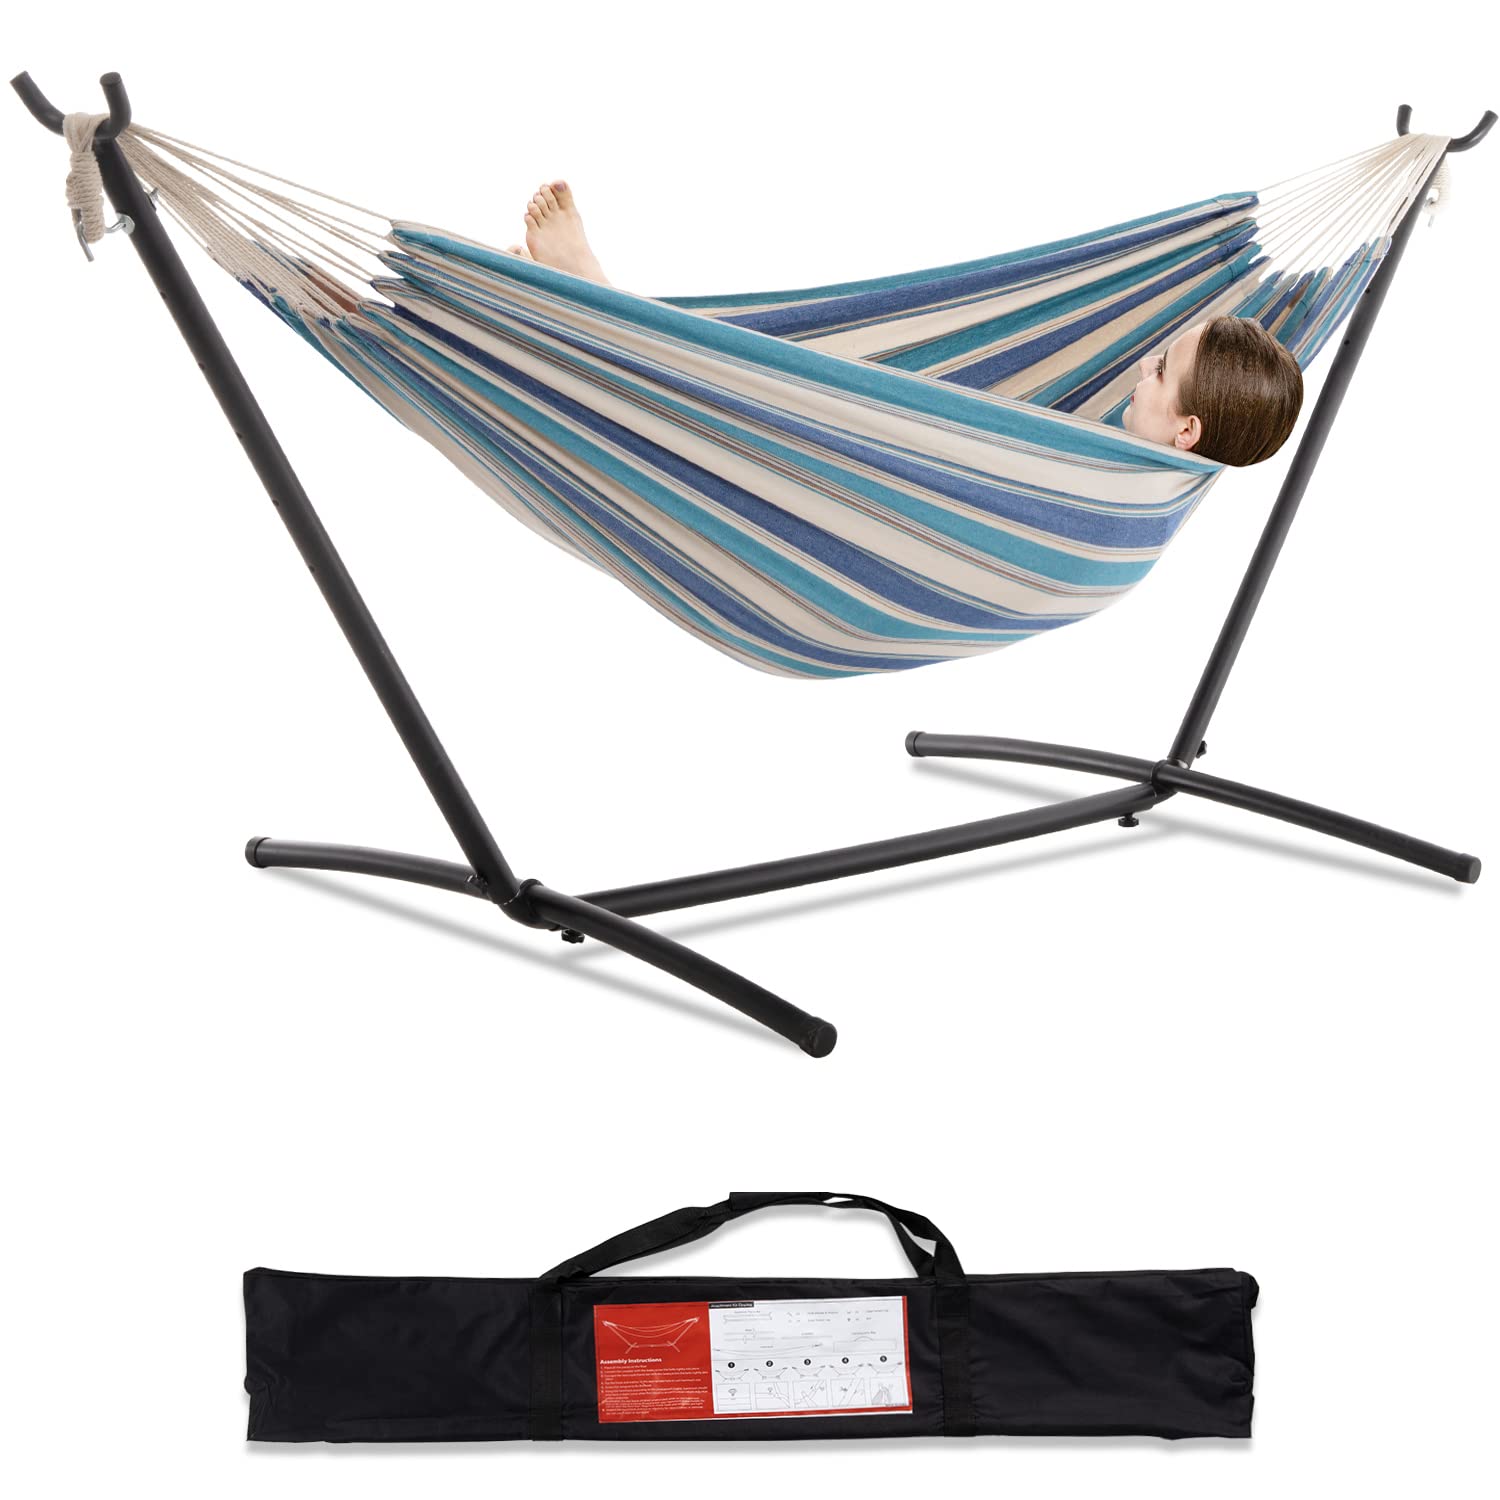 PNAEUT Double Hammock with Space Saving Steel Stand Included 2 Person Heavy Duty Garden Yard Outdoor 450lb Capacity Hammocks